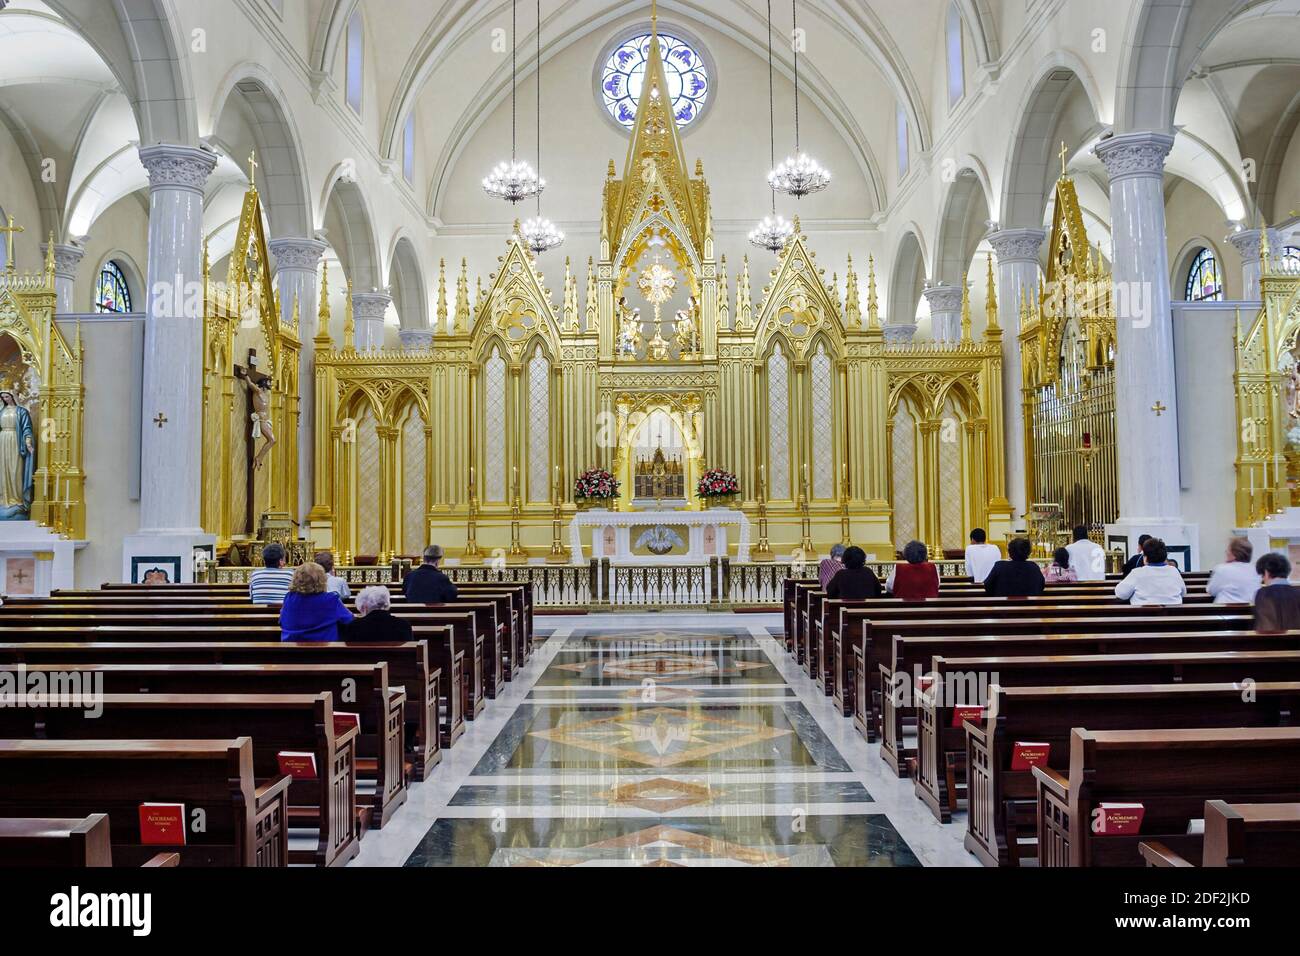 Alabama Hanceville Shrine of the Most Blessed Sacrament,of Our Lady of the Angels Monastery OLAM,13th century Franciscan style church monastery,inside Stock Photo